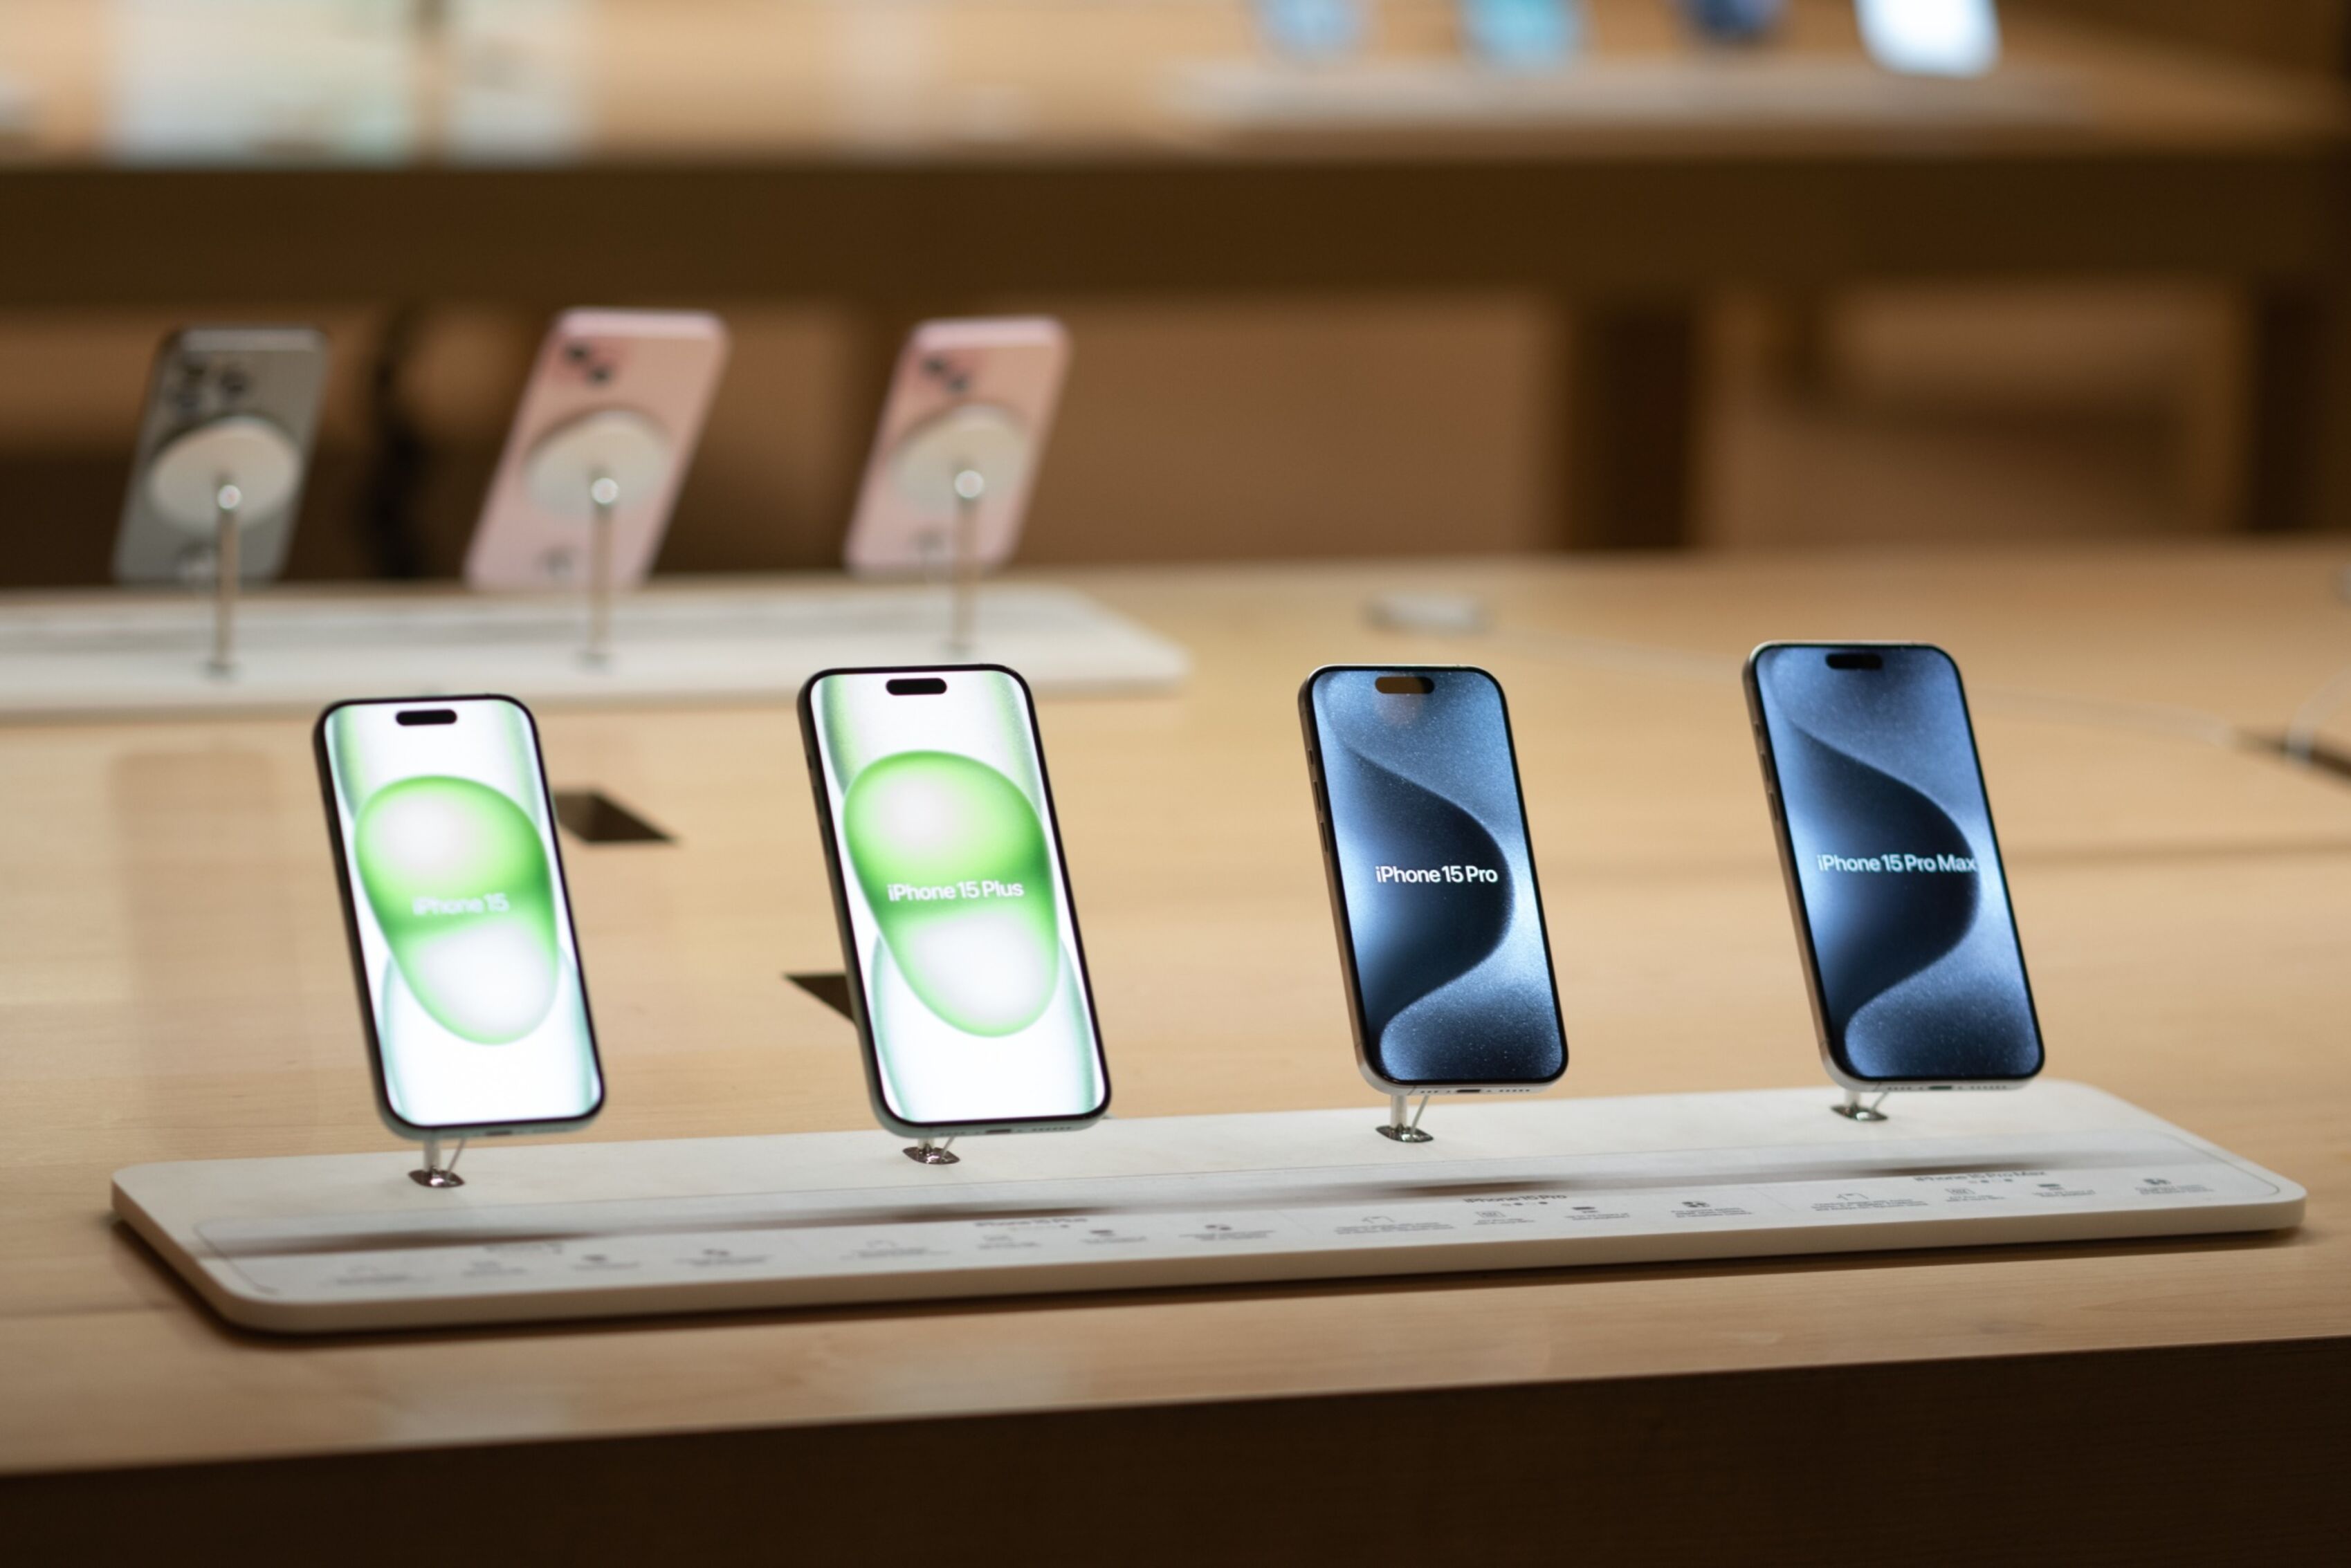 Apple shipped 5 million fewer iPhones in the first quarter than it did a year earlier, according to IDC. Photo: Bloomberg